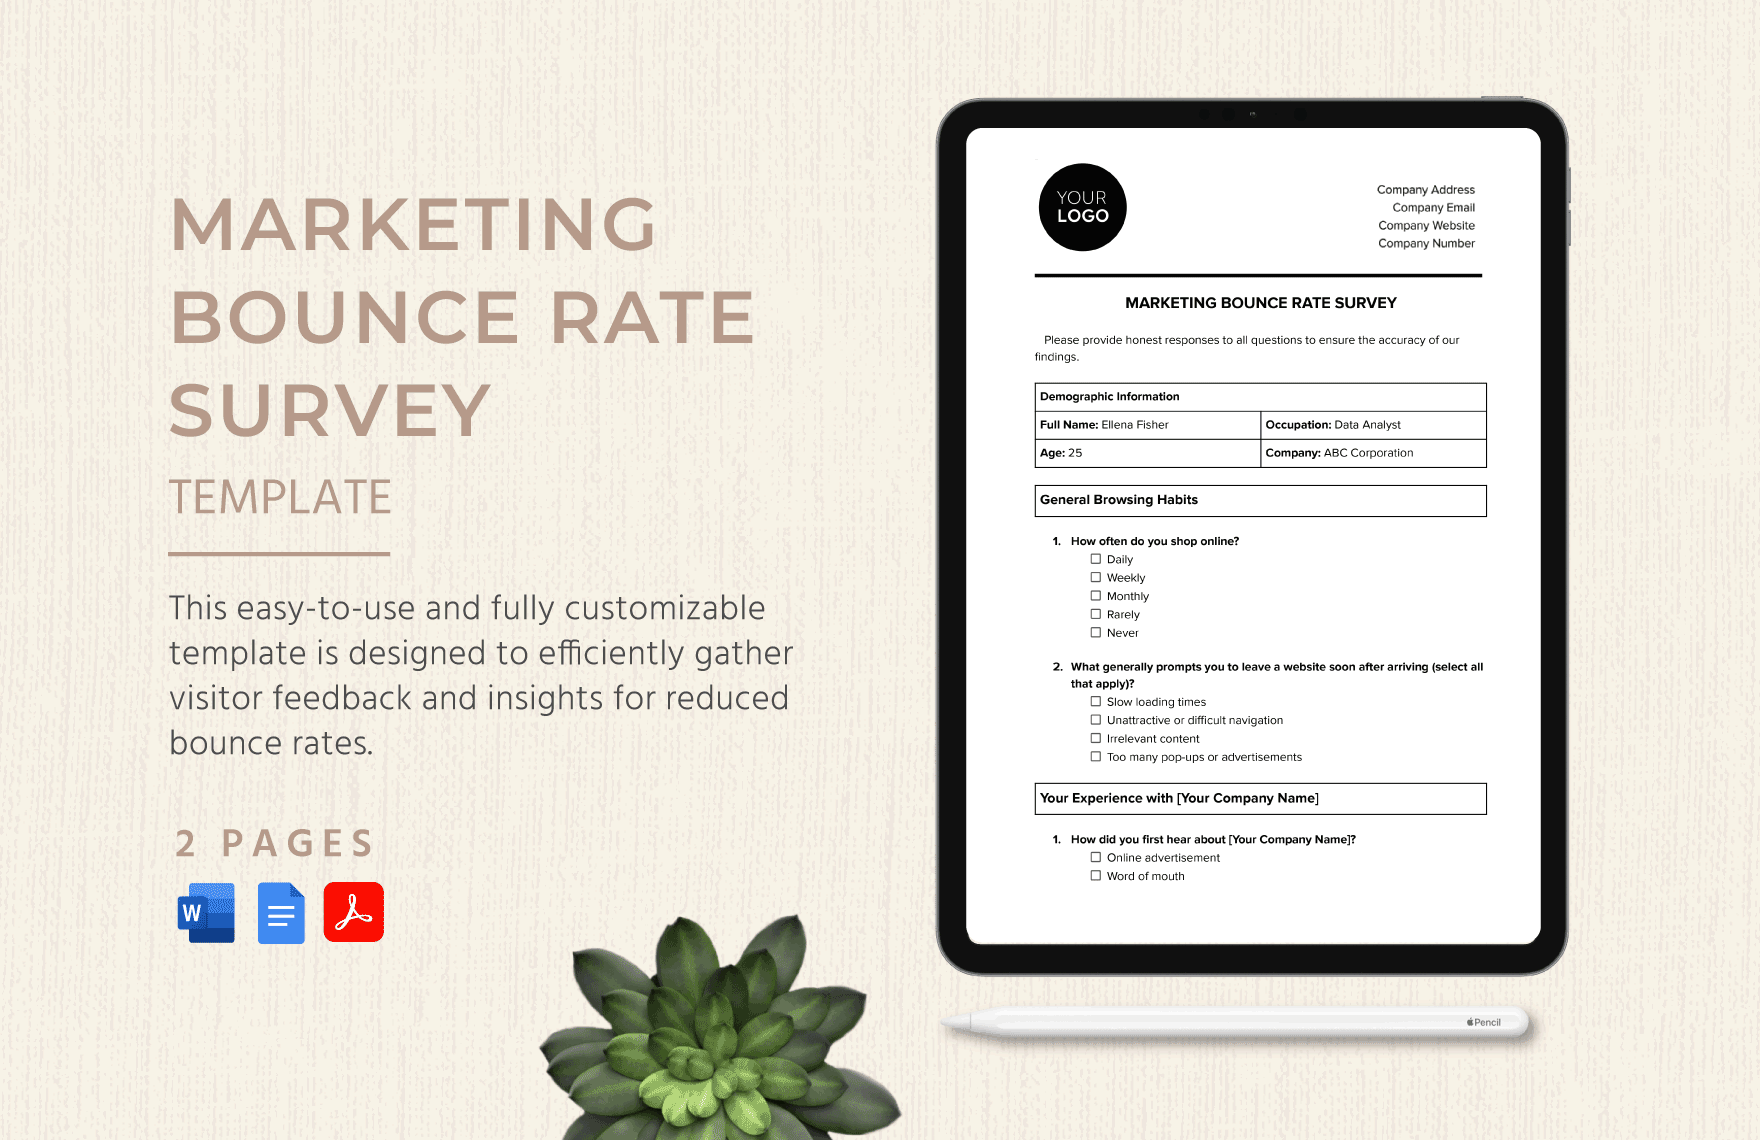 Marketing Bounce Rate Survey Template in Word, Google Docs, PDF